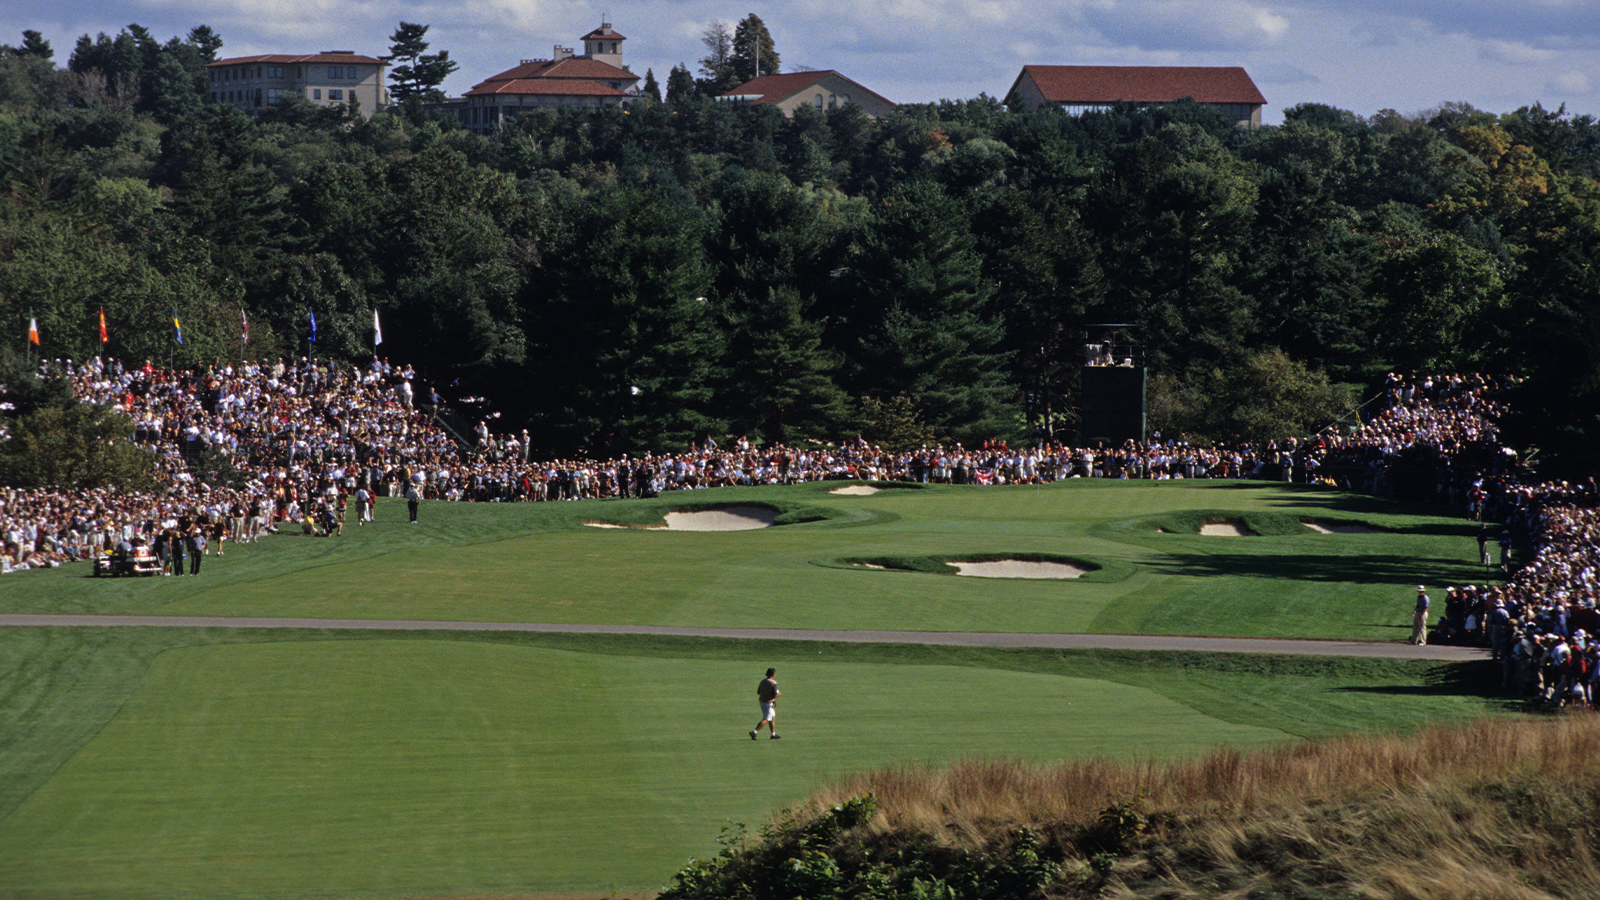 The Country Club, located in Brookline, Massachusetts, is the oldest country club in the United States and hosted the 33rd Ryder Cup in 1999.